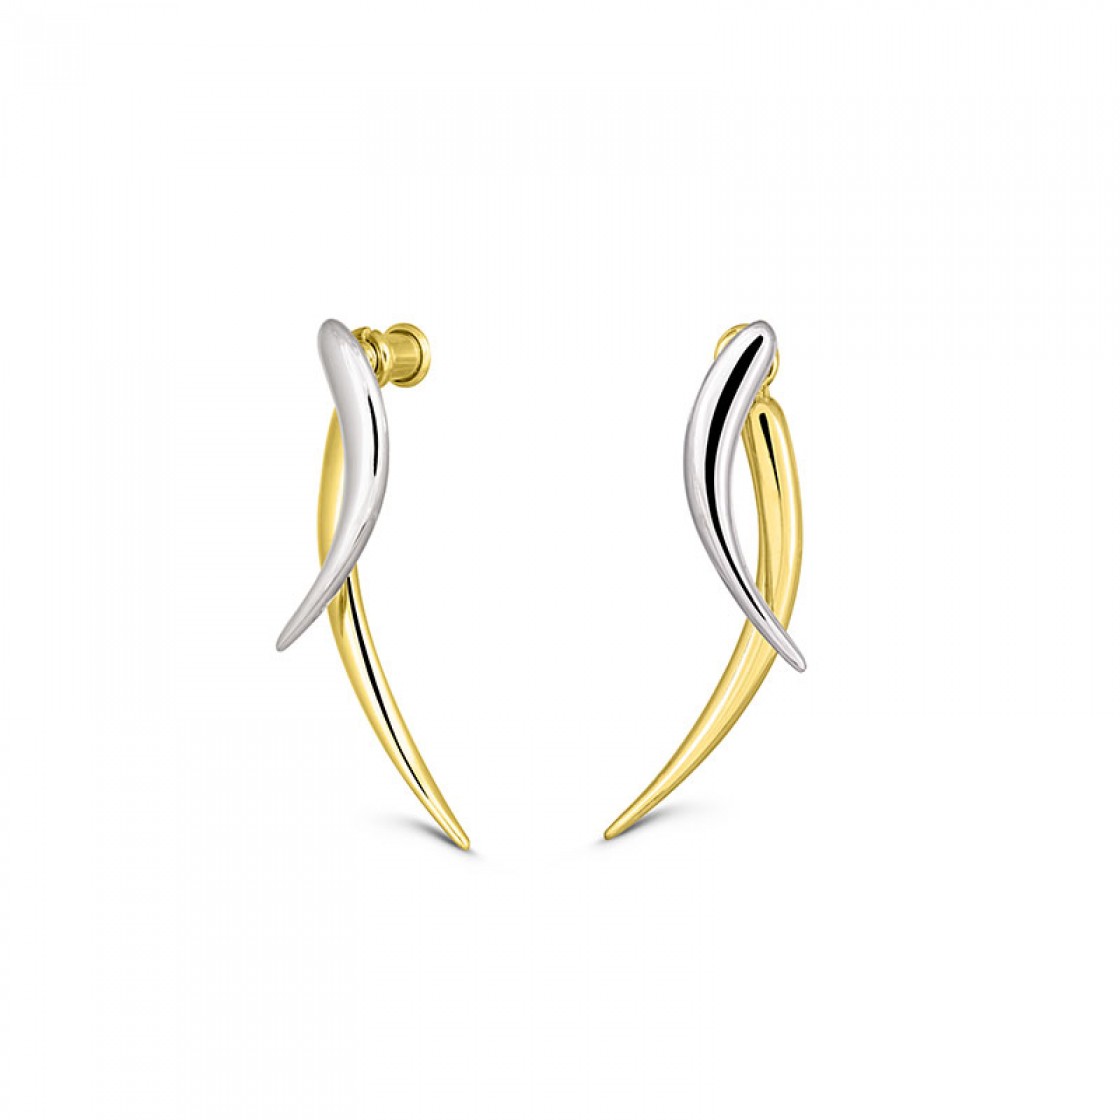 A bold statement piece. Double sided earrings that complement your look with their elegant and unique design